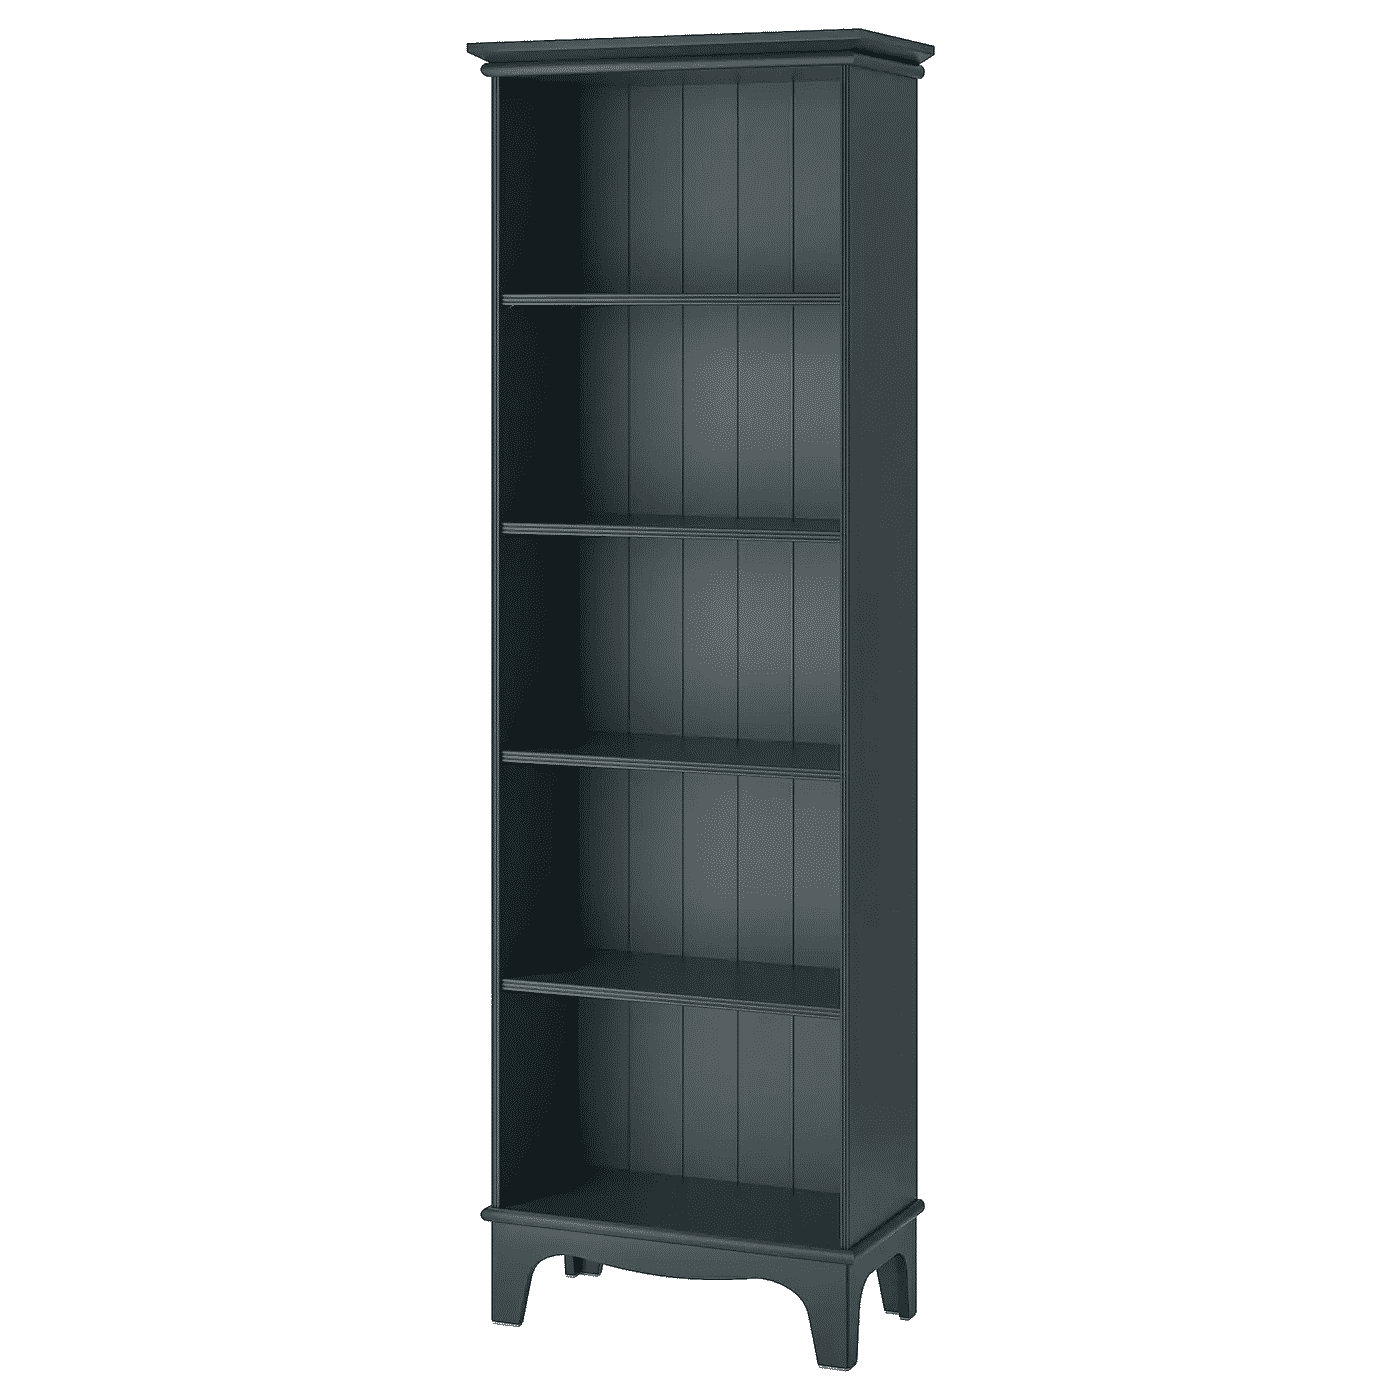 20 Best Ikea Bookcases Review 2021, 20 Inch Wide Bookcase Ikea